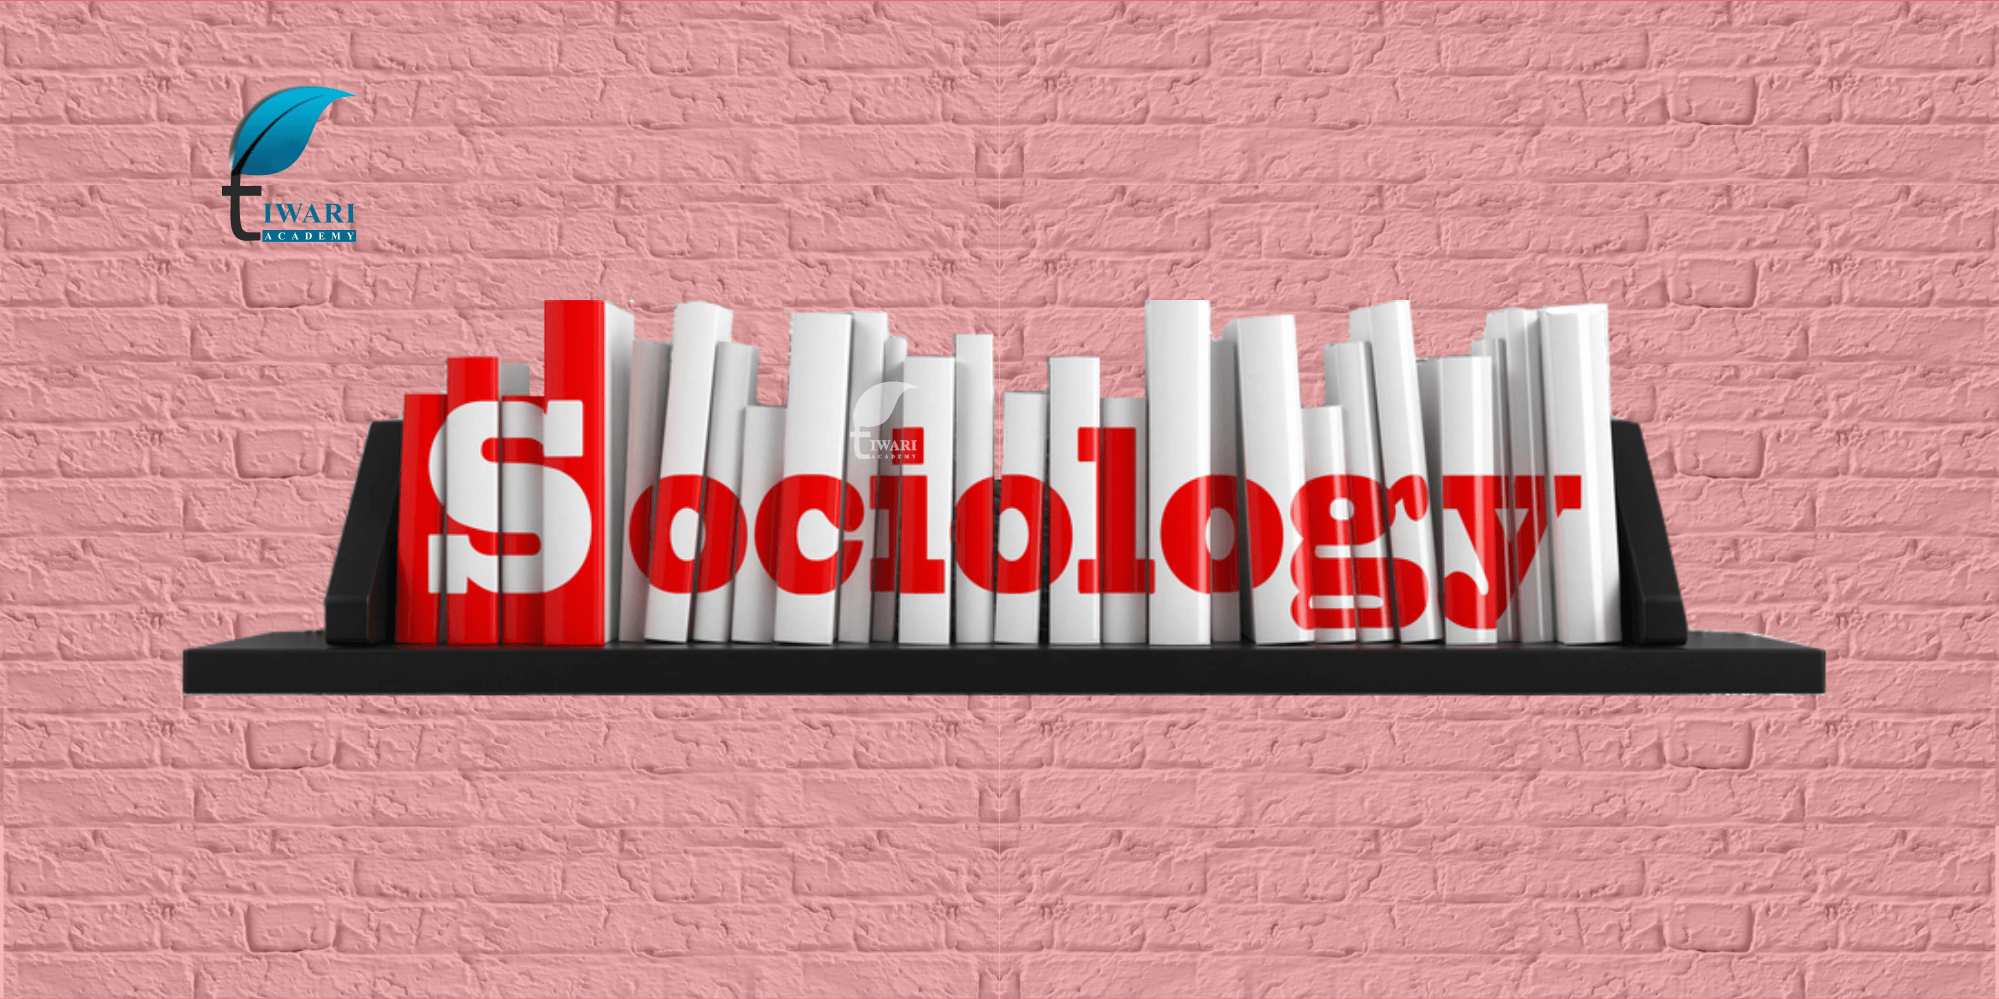 What is Sociology?